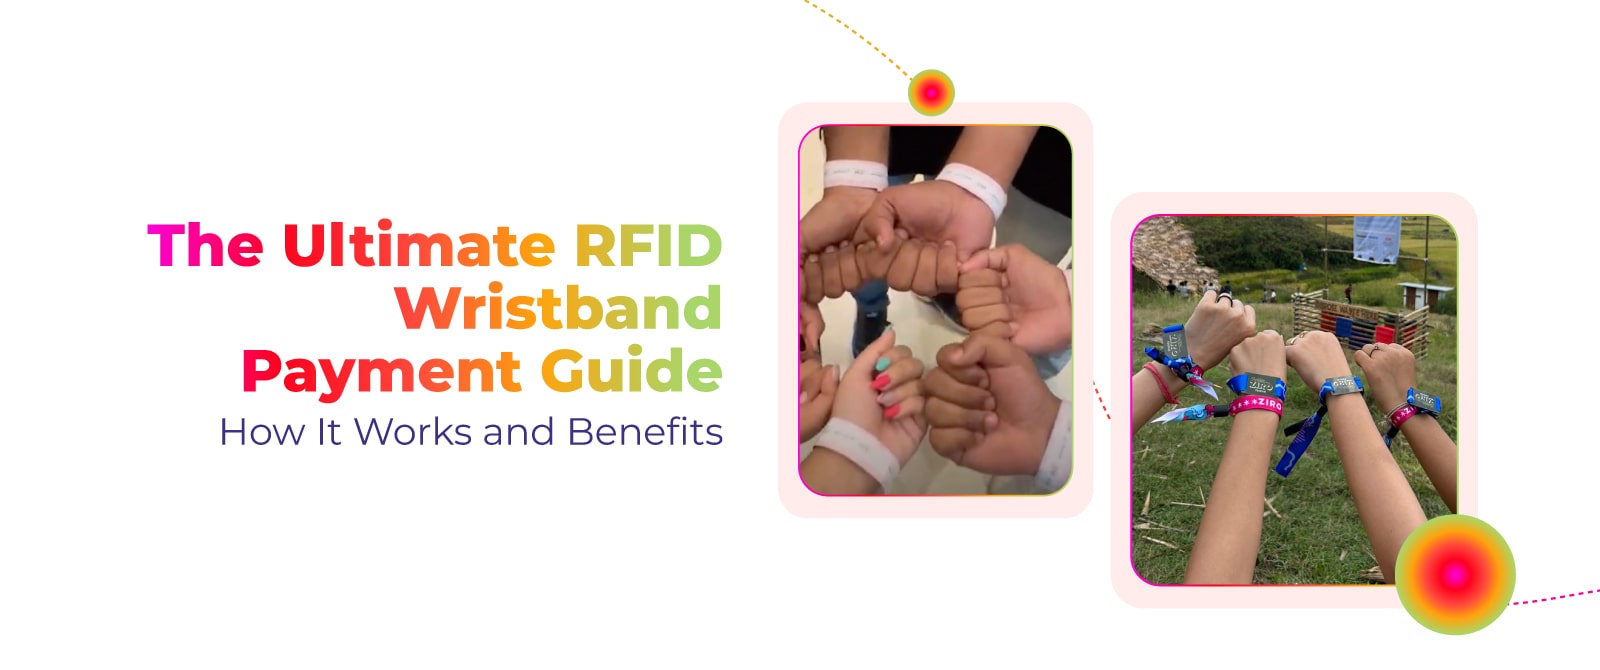 The Ultimate RFID Wristband Payment Guide: How It Works and Benefits